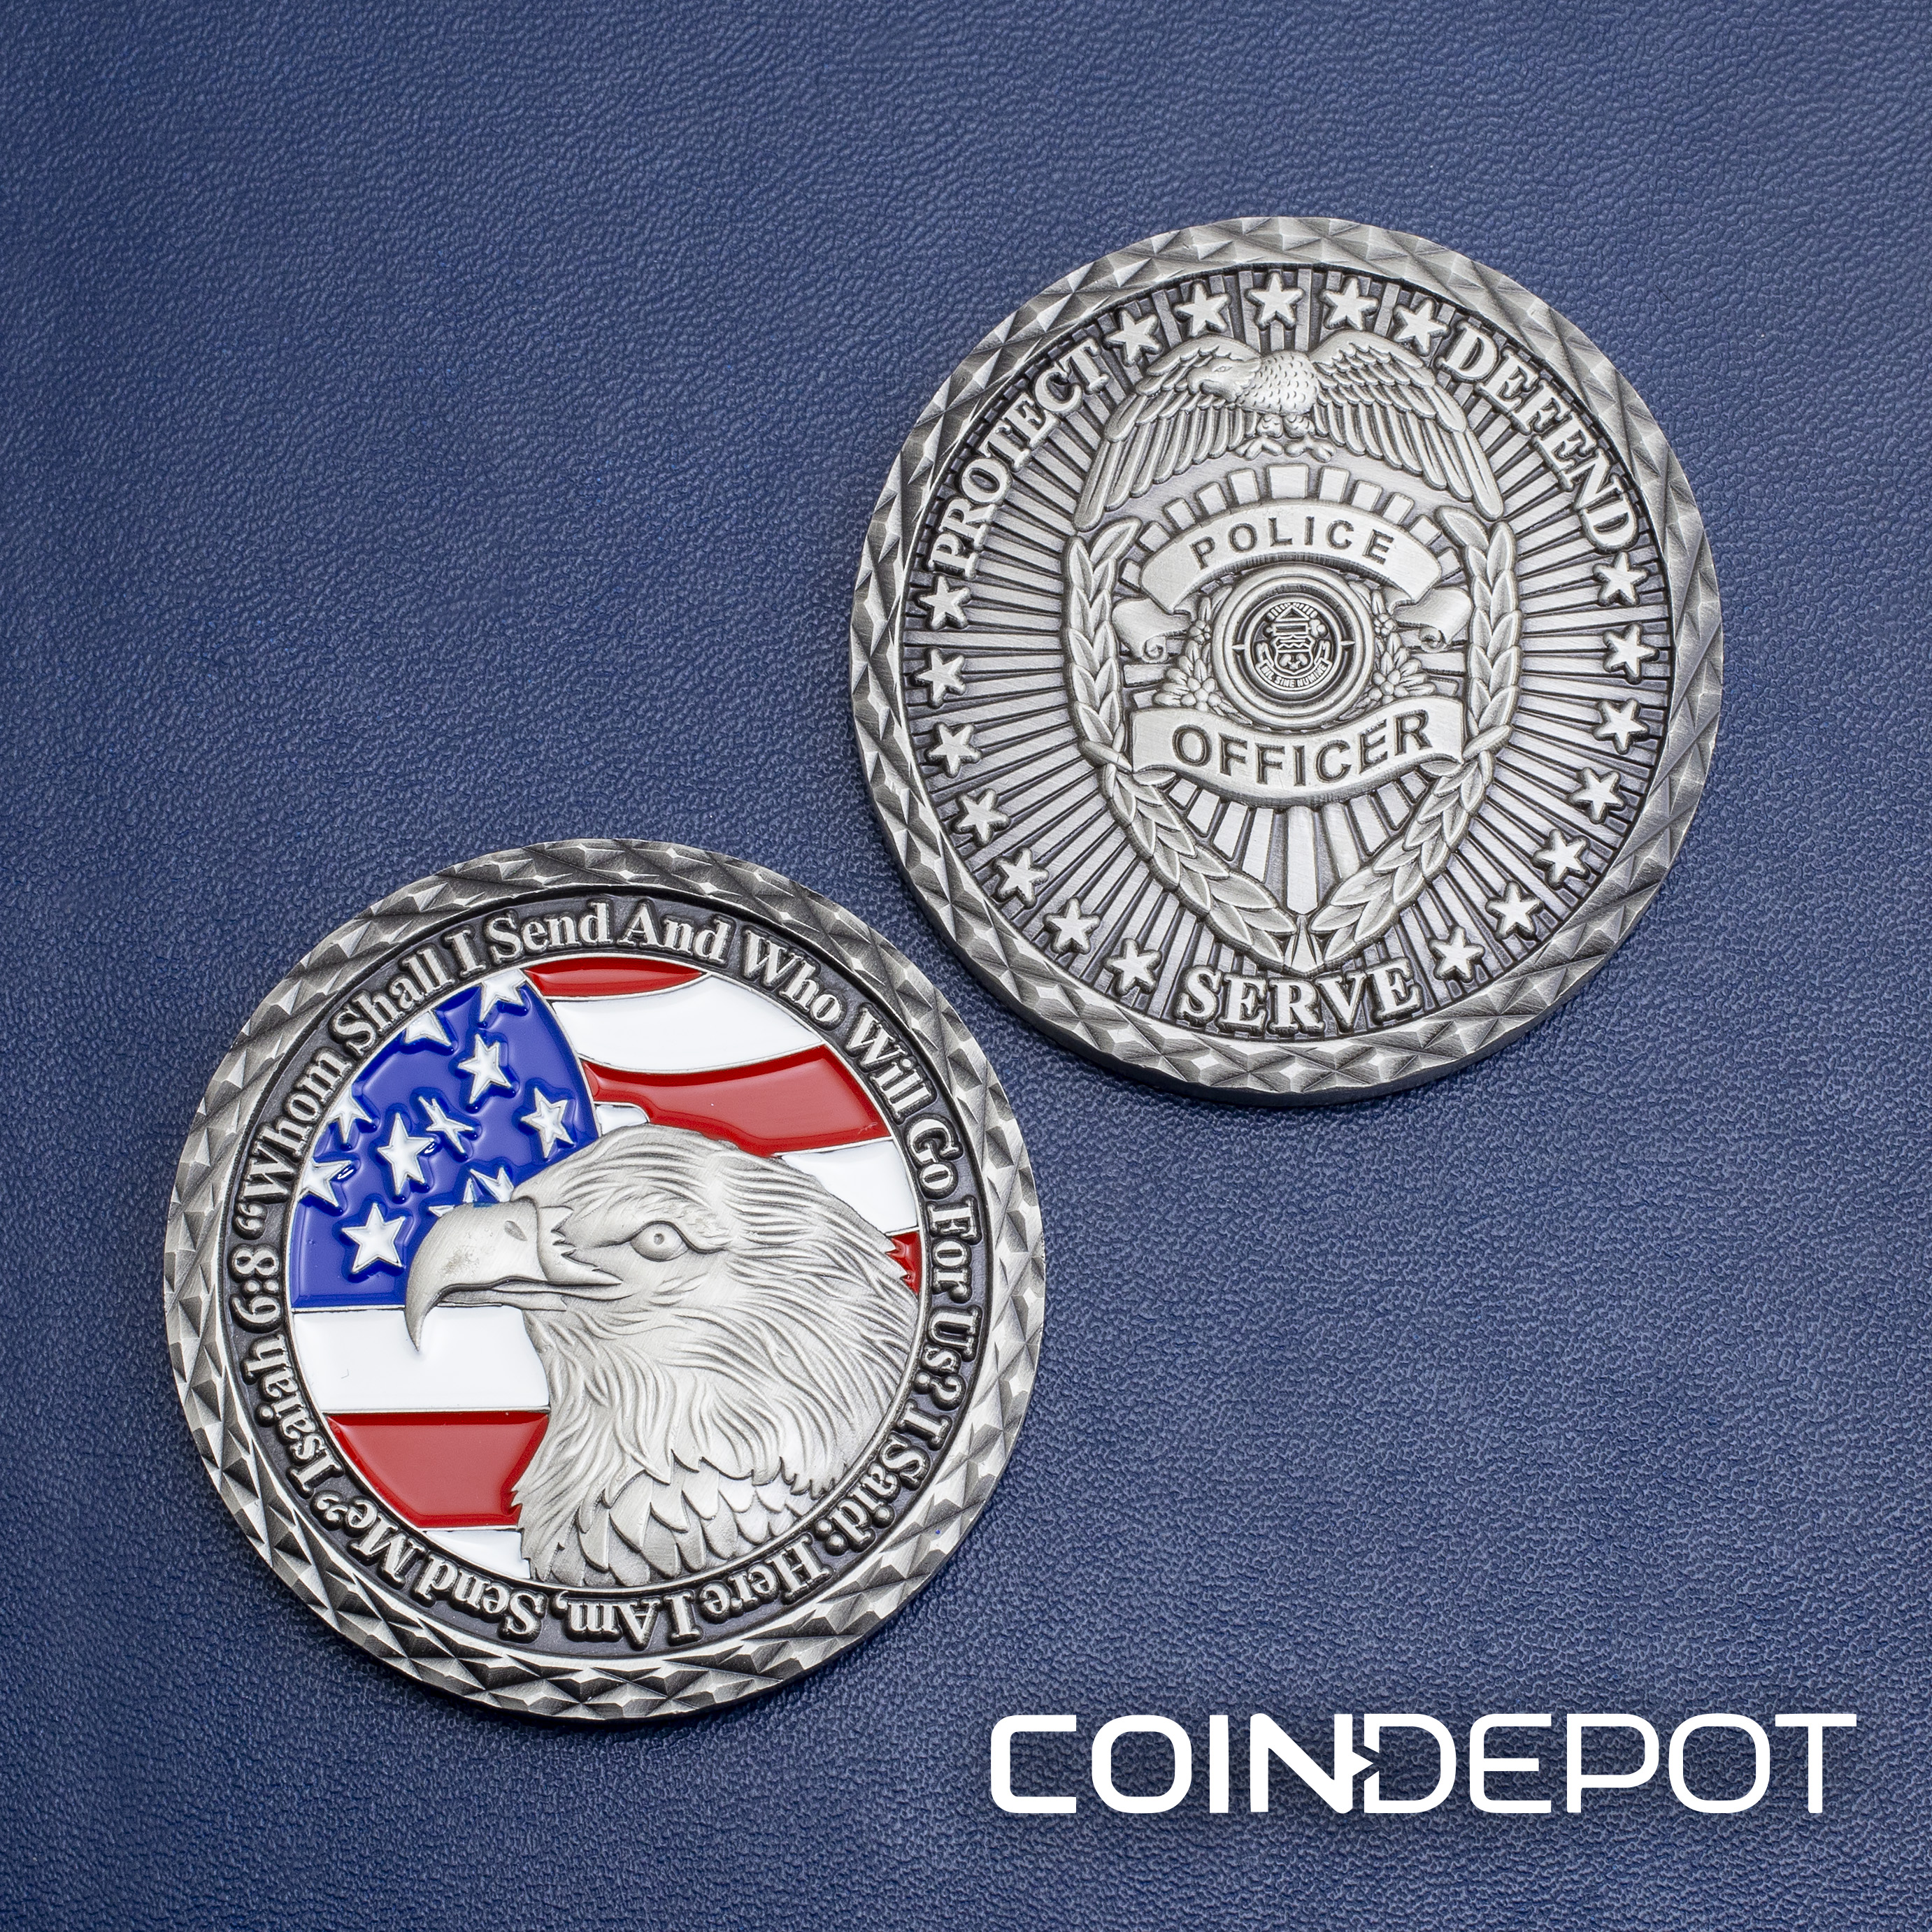 Police Officer officer challenge coin by Coin Depot